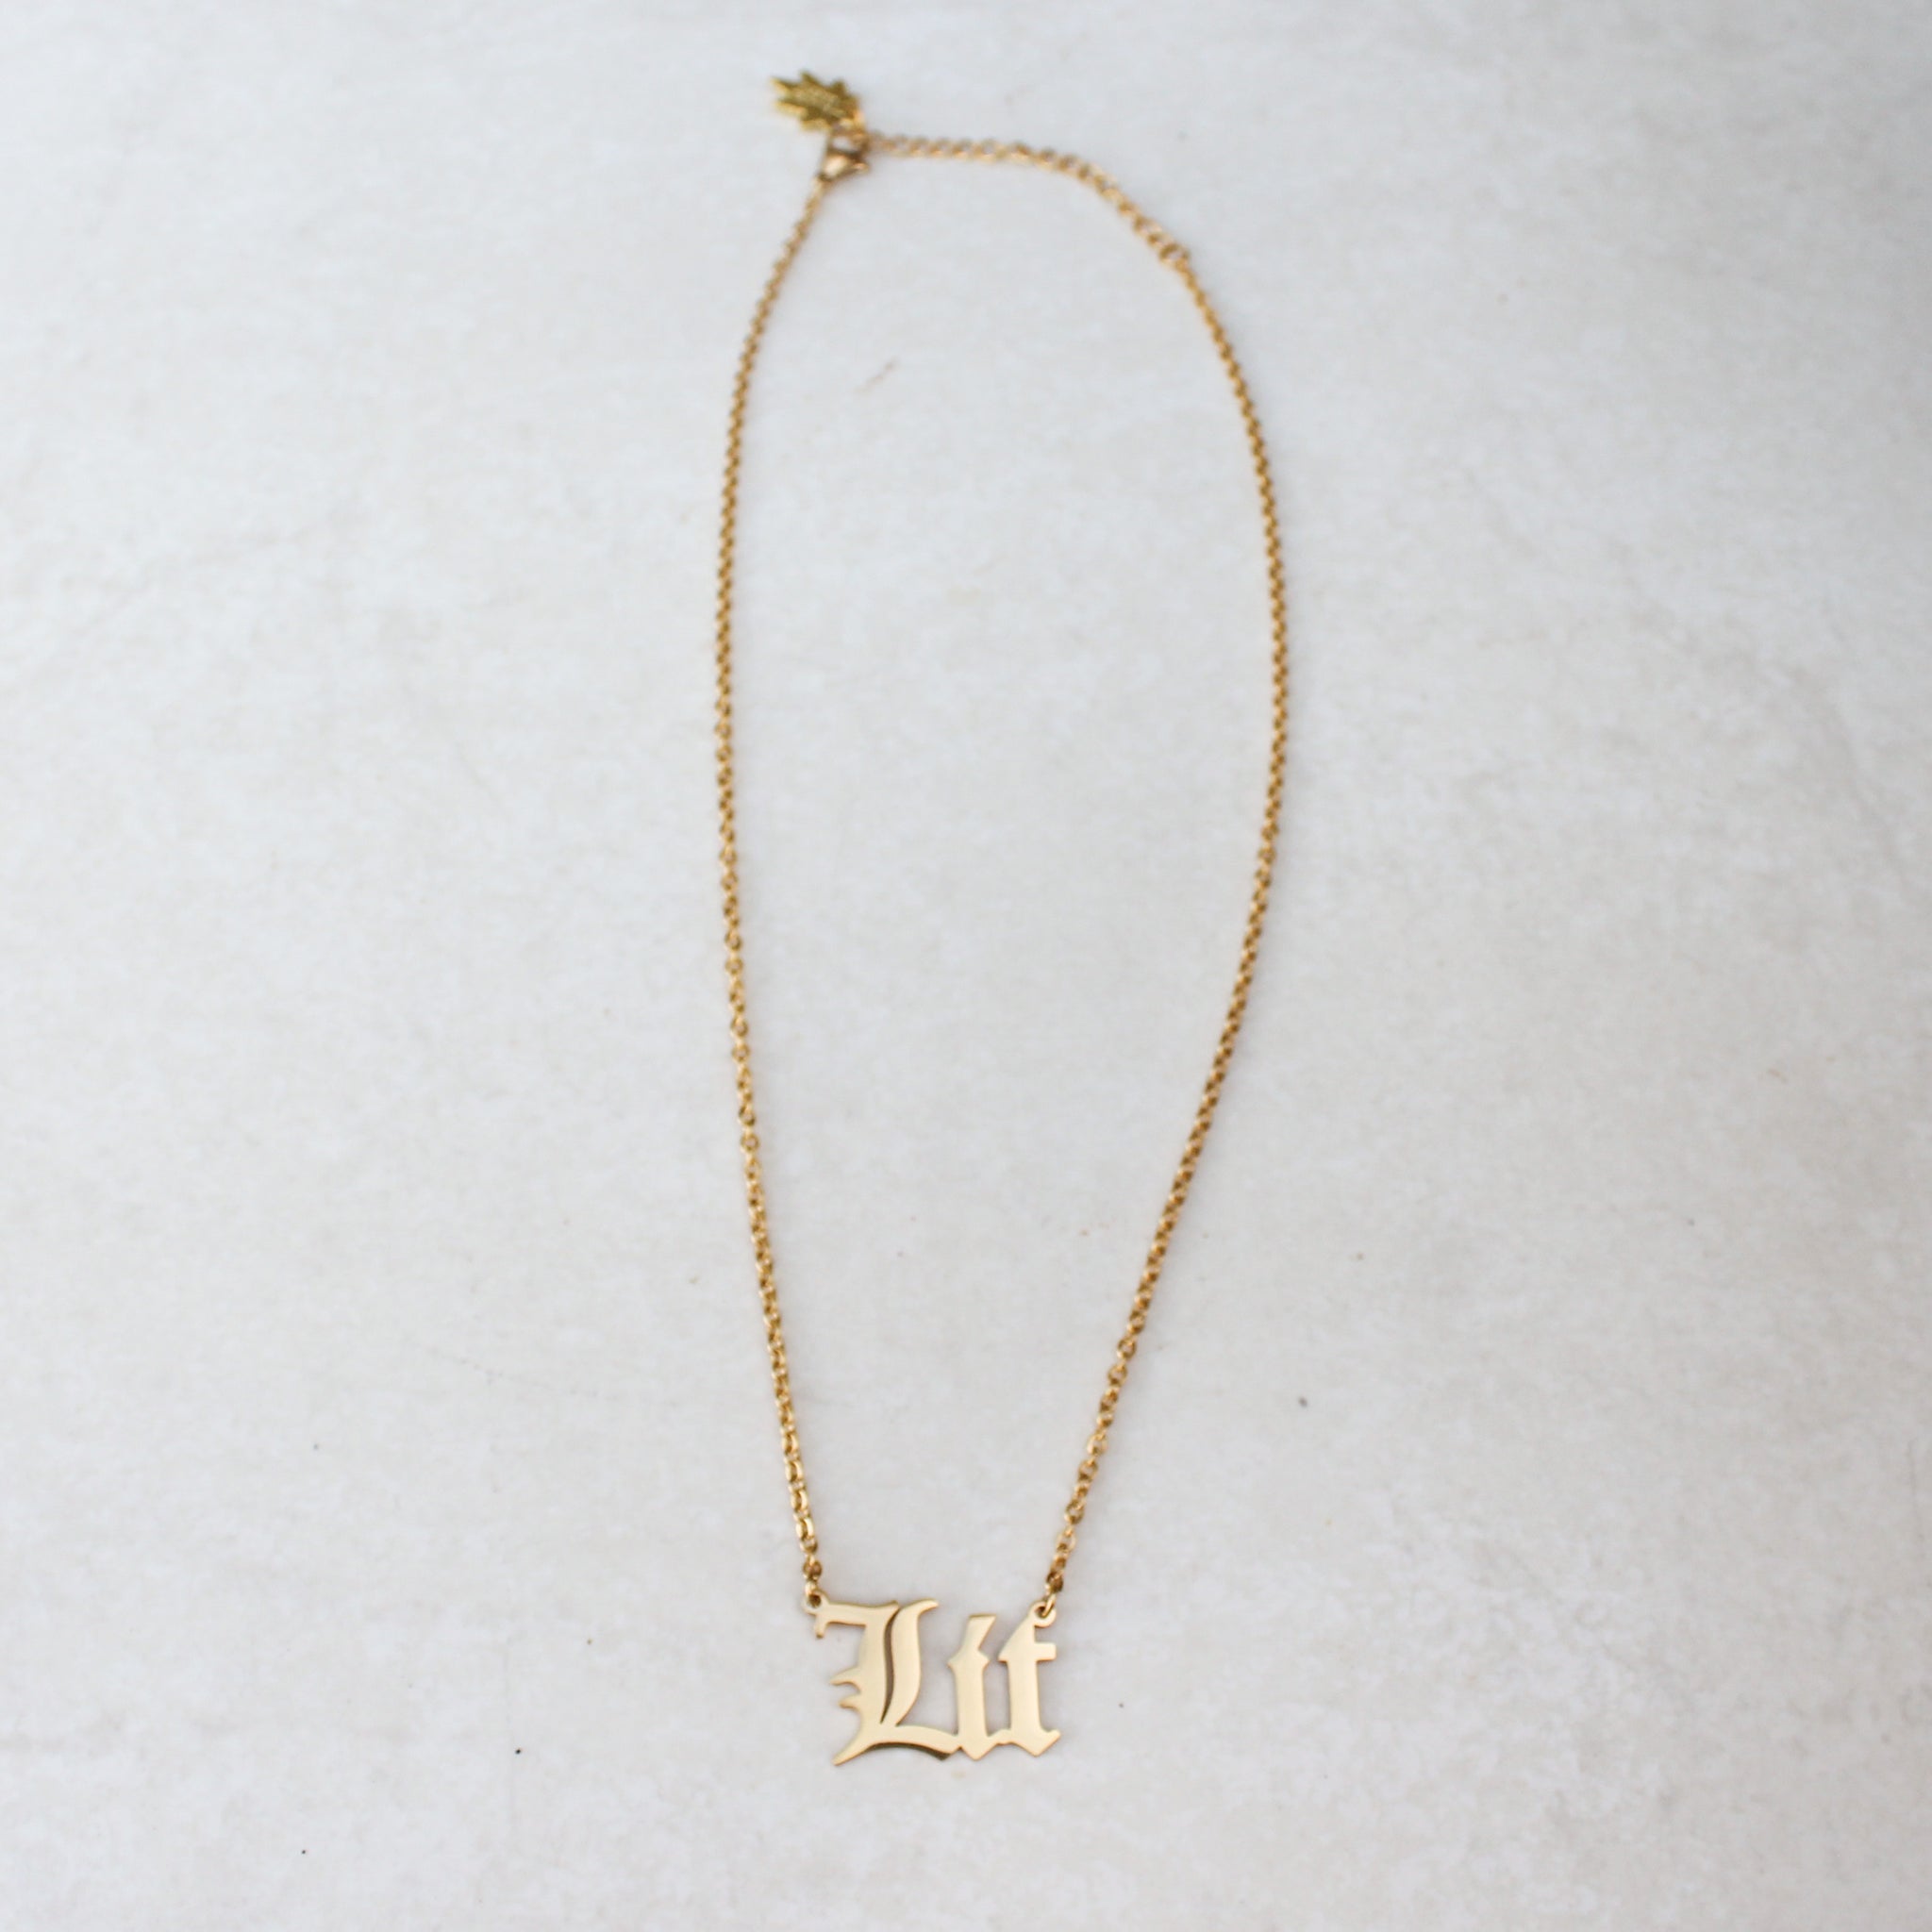 Lit Gold Statement Necklace - Blunted Objects